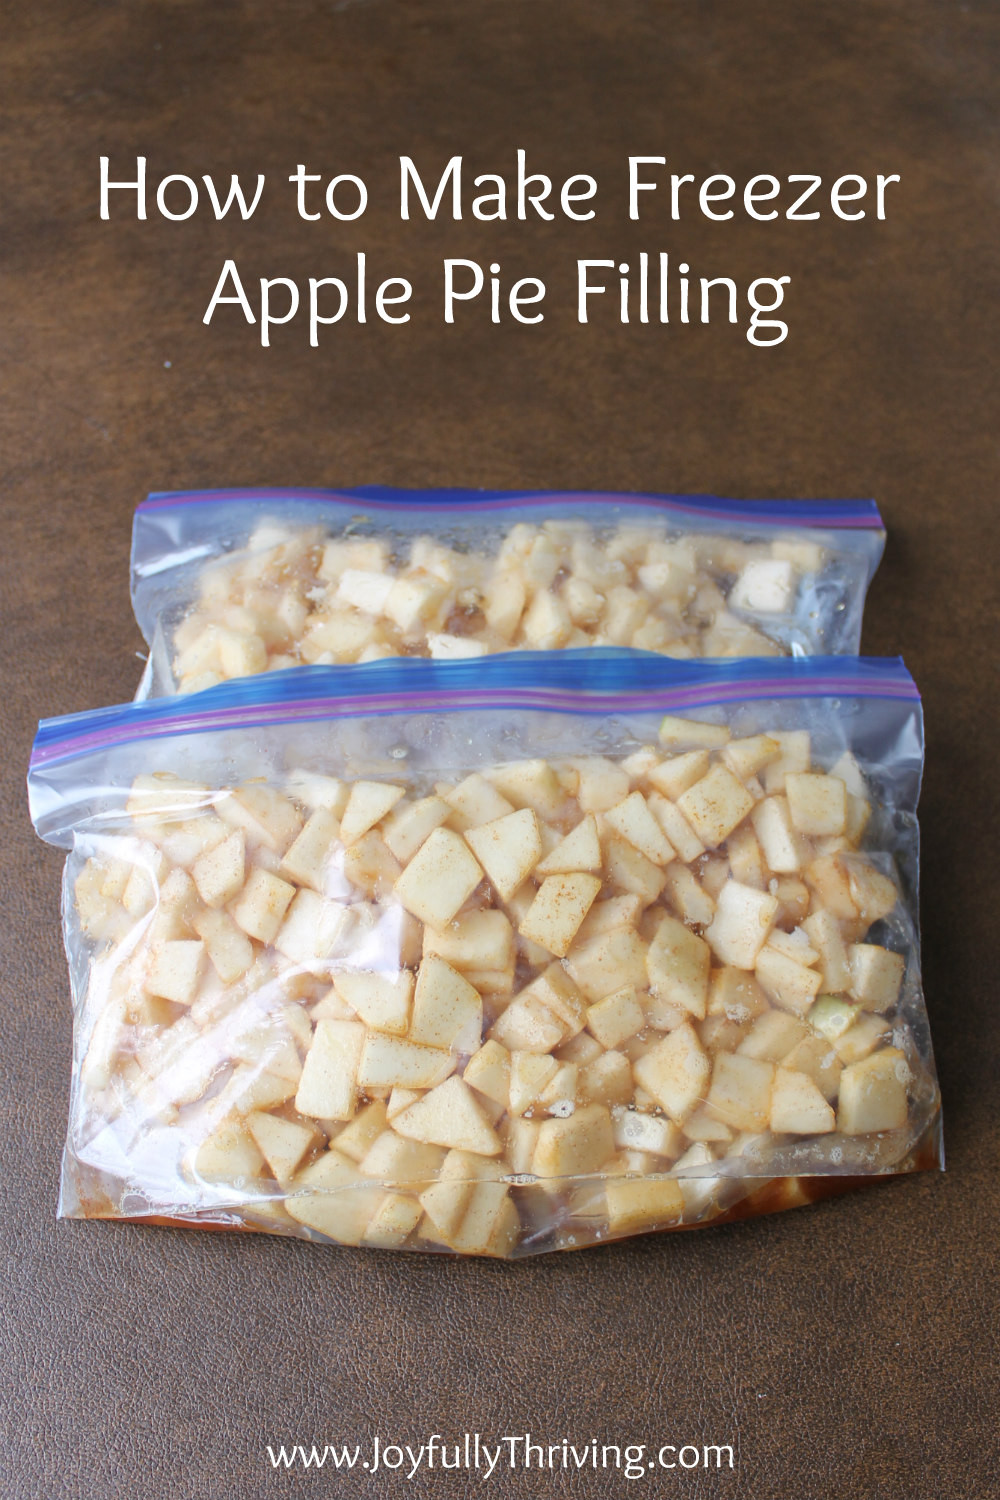 Apple Pie Filling For Freezer
 How to Make Freezer Apple Pie Filling & Apple Pie Kits